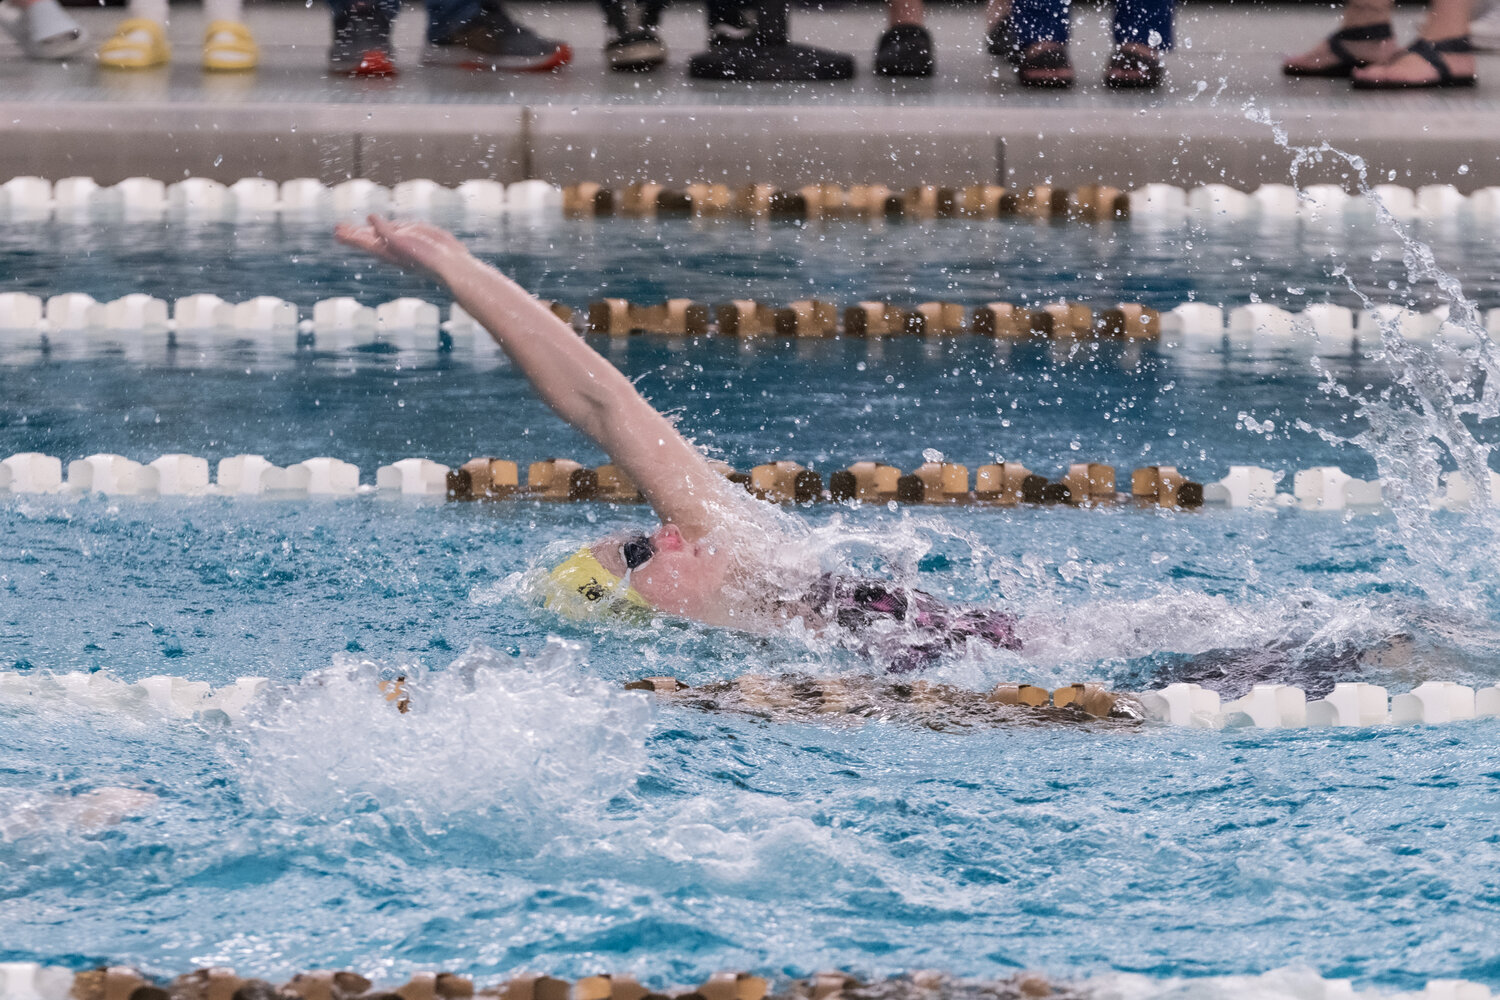 Senior Ashtyn Stewart swims an emotional last 100-backstroke. Stewart placed third overall in the section, missing a second-place finish and trip to state by 1.62 seconds. Stewart is also an excellent diver finishing eighth overall with a score of 313.20.